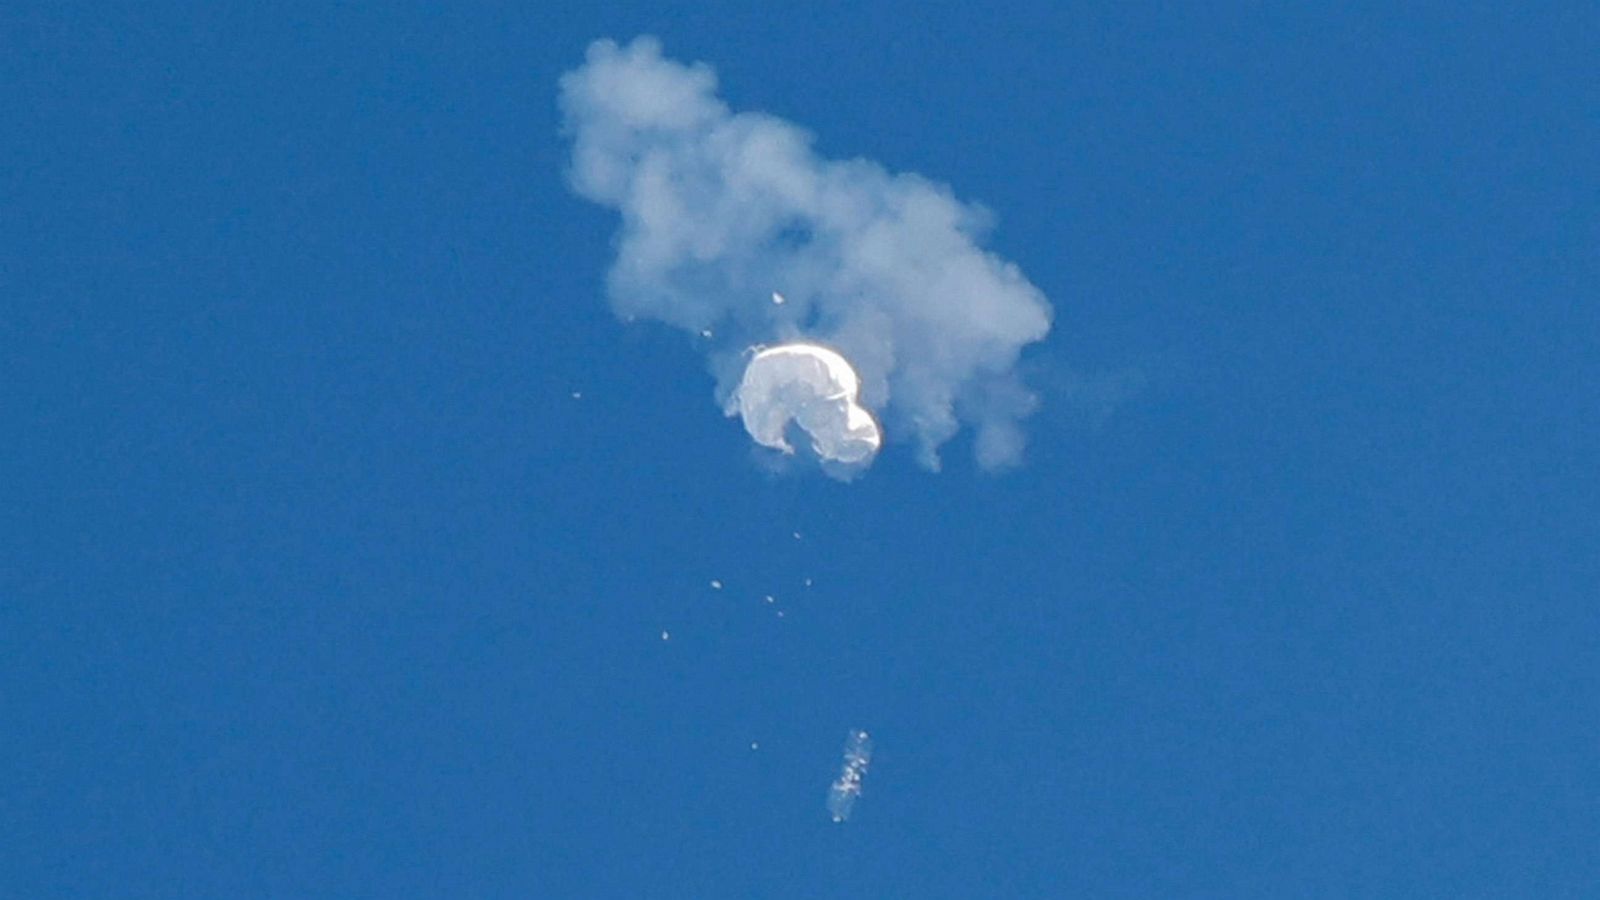 US tracked Chinese balloon from launch, may have accidentally ...